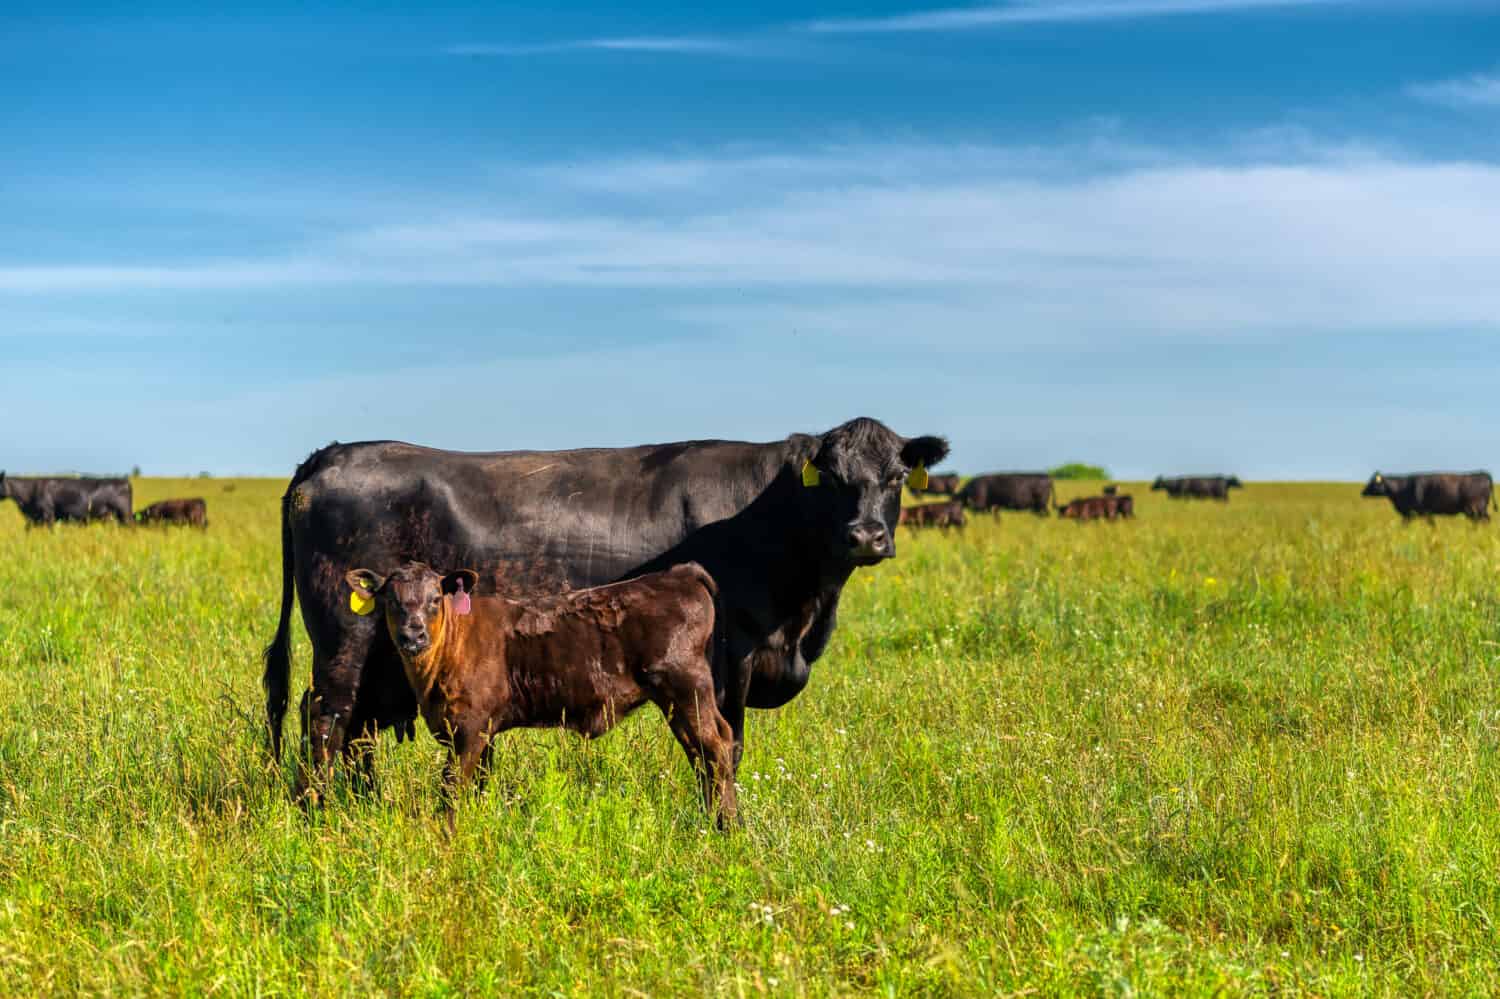 A black angus cow and calf graze on a green meadow. Agriculture, cattle breeding.